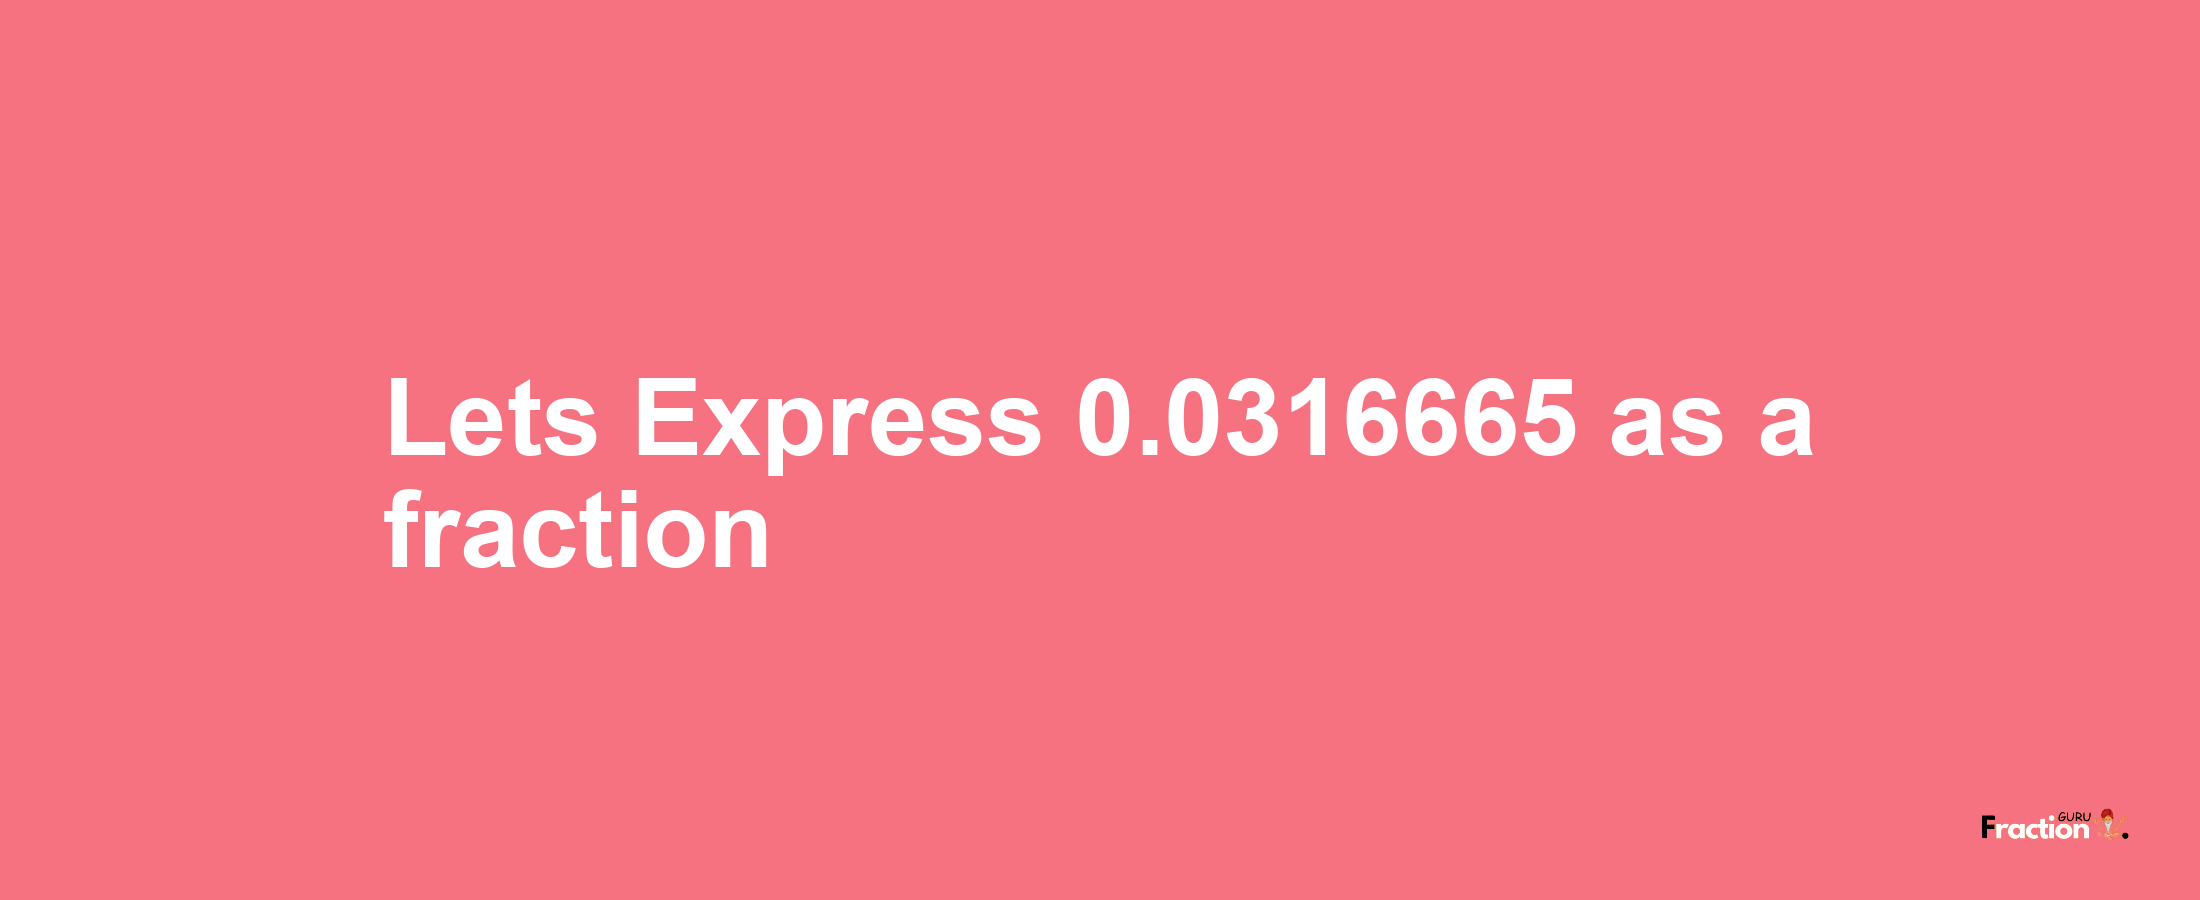 Lets Express 0.0316665 as afraction